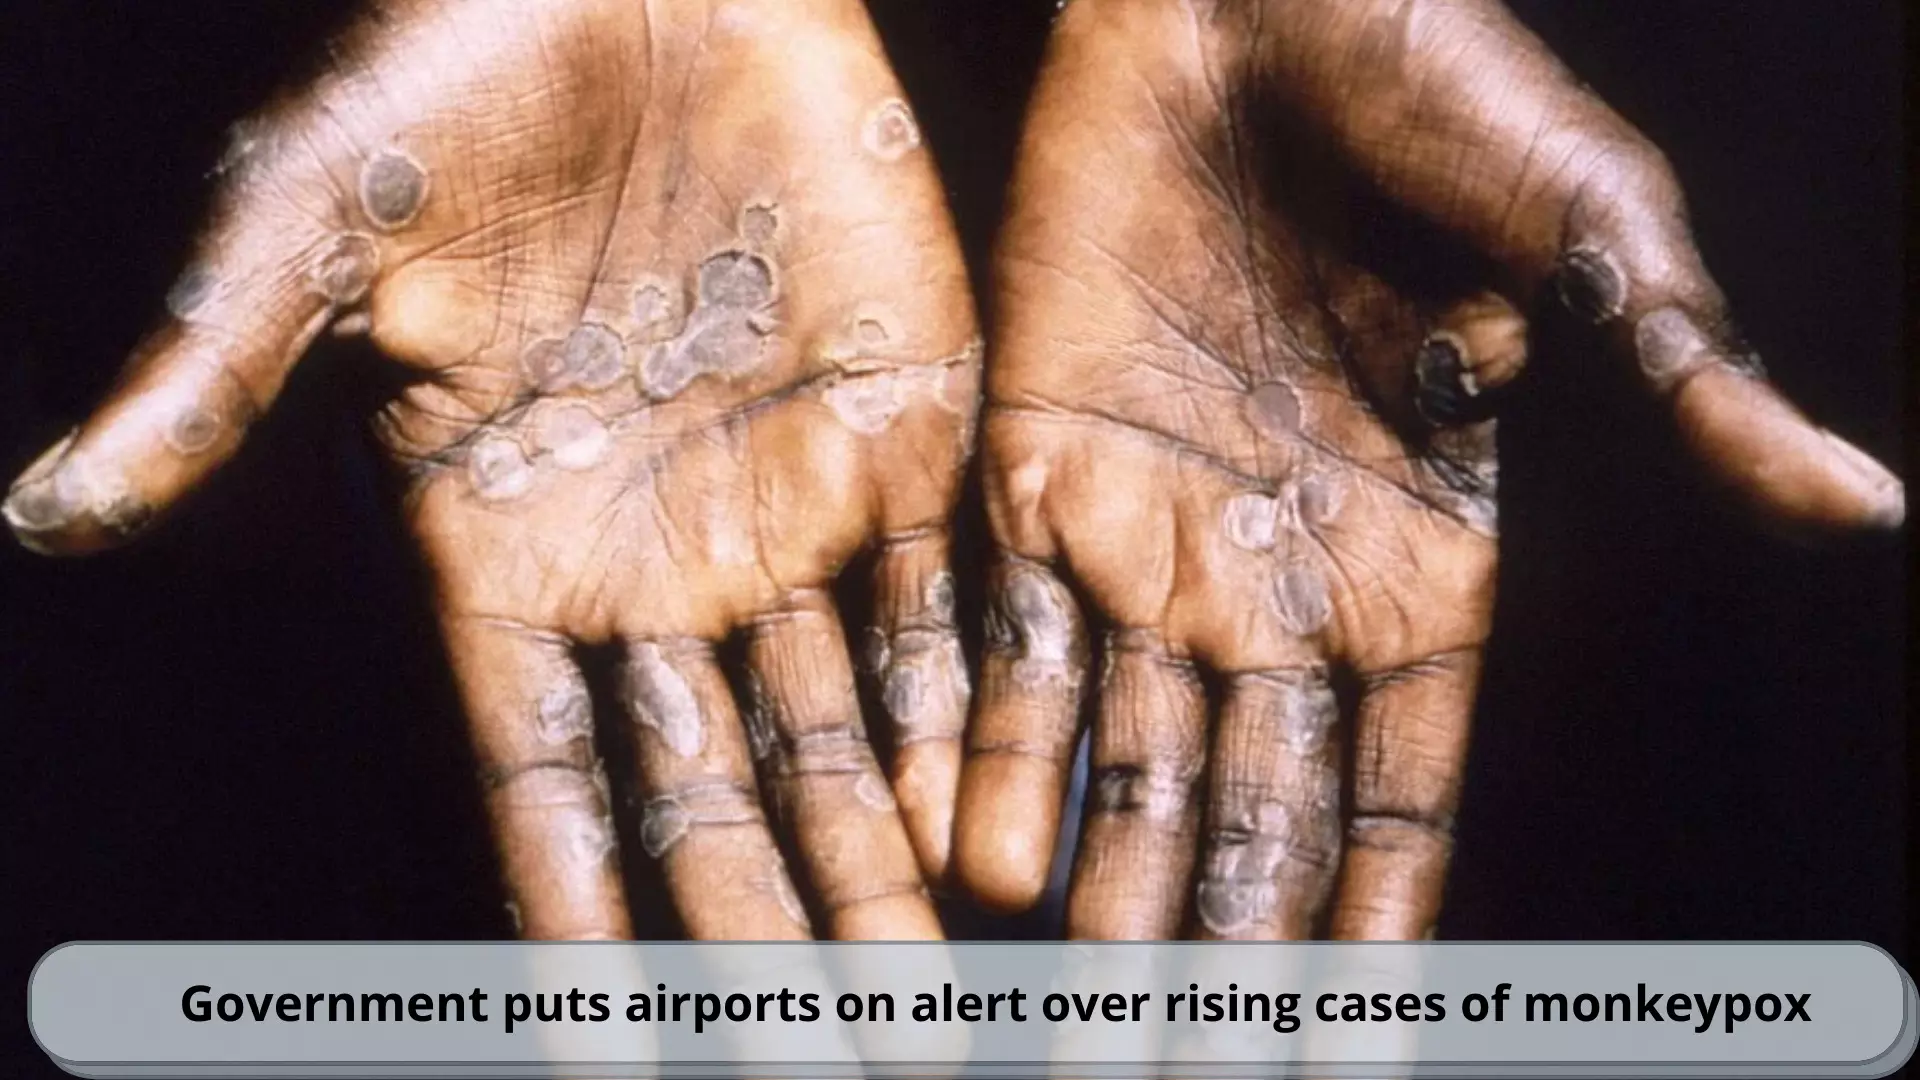 Govt puts airports on alert over rising monkeypox cases